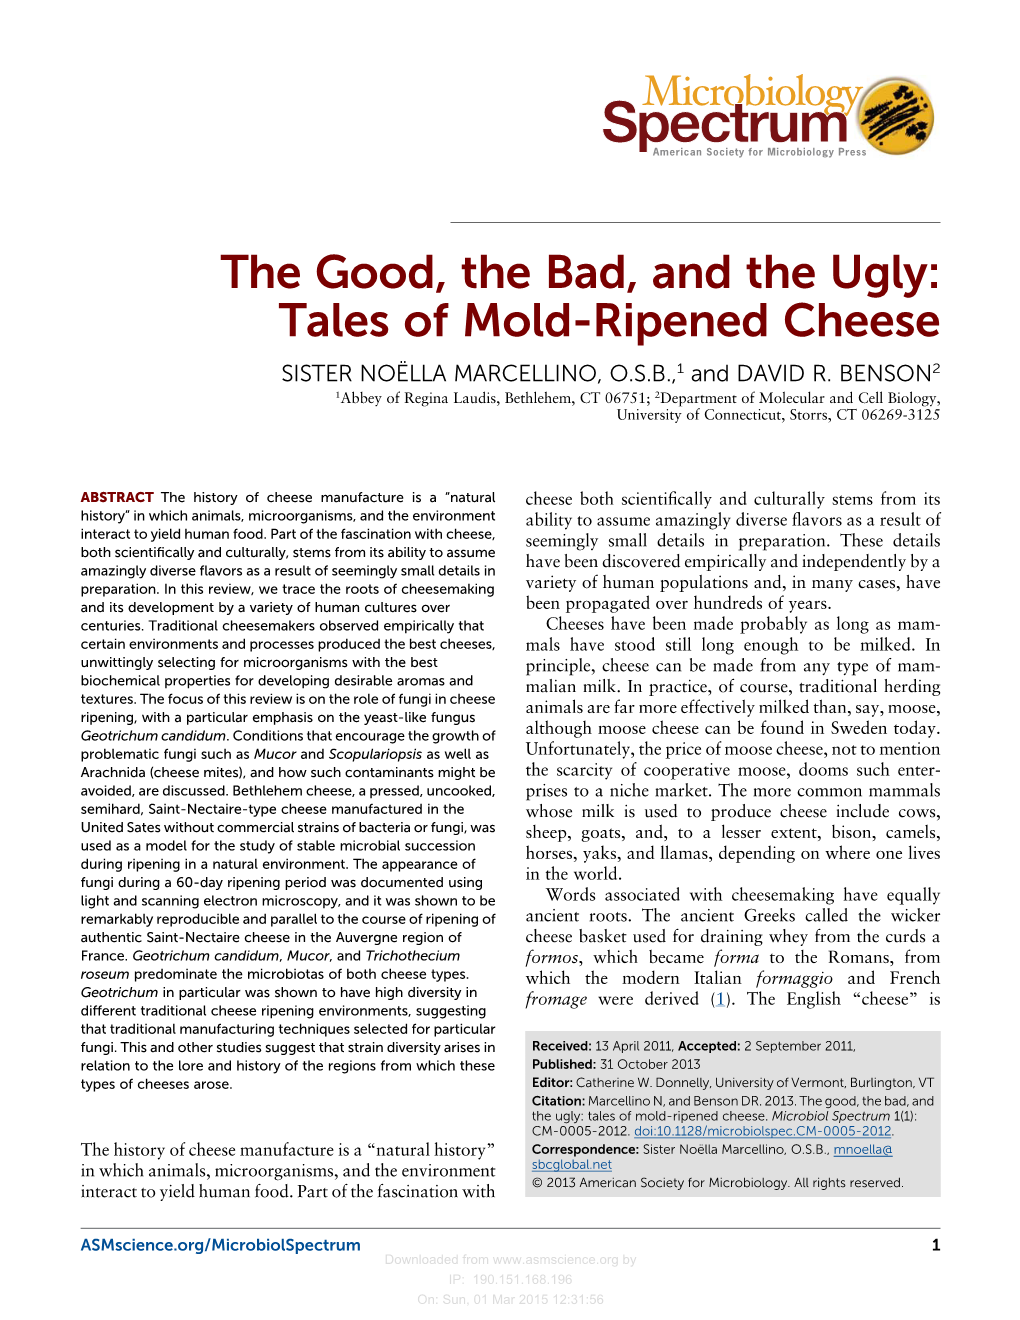 Tales of Mold-Ripened Cheese SISTER NOËLLA MARCELLINO, O.S.B.,1 and DAVID R